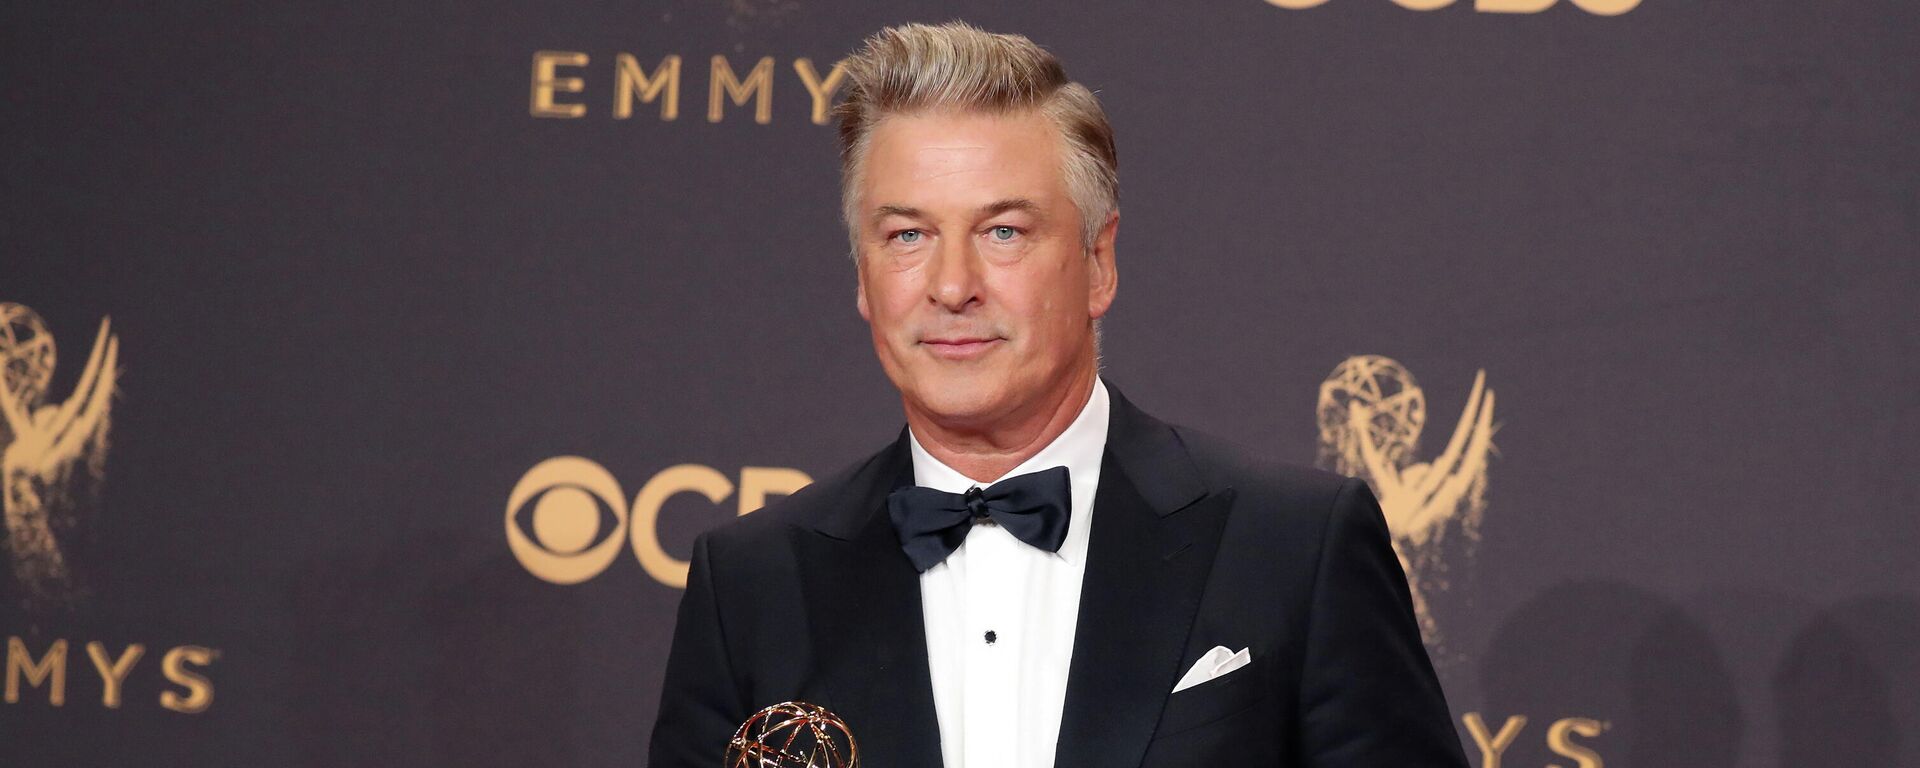  69th Primetime Emmy Awards – Photo Room – Los Angeles, California, U.S., 17/09/2017 - Alec Baldwin with his Emmy for Outstanding Supporting Actor in a Comedy Series for Saturday Night Live.  - Sputnik International, 1920, 22.10.2021